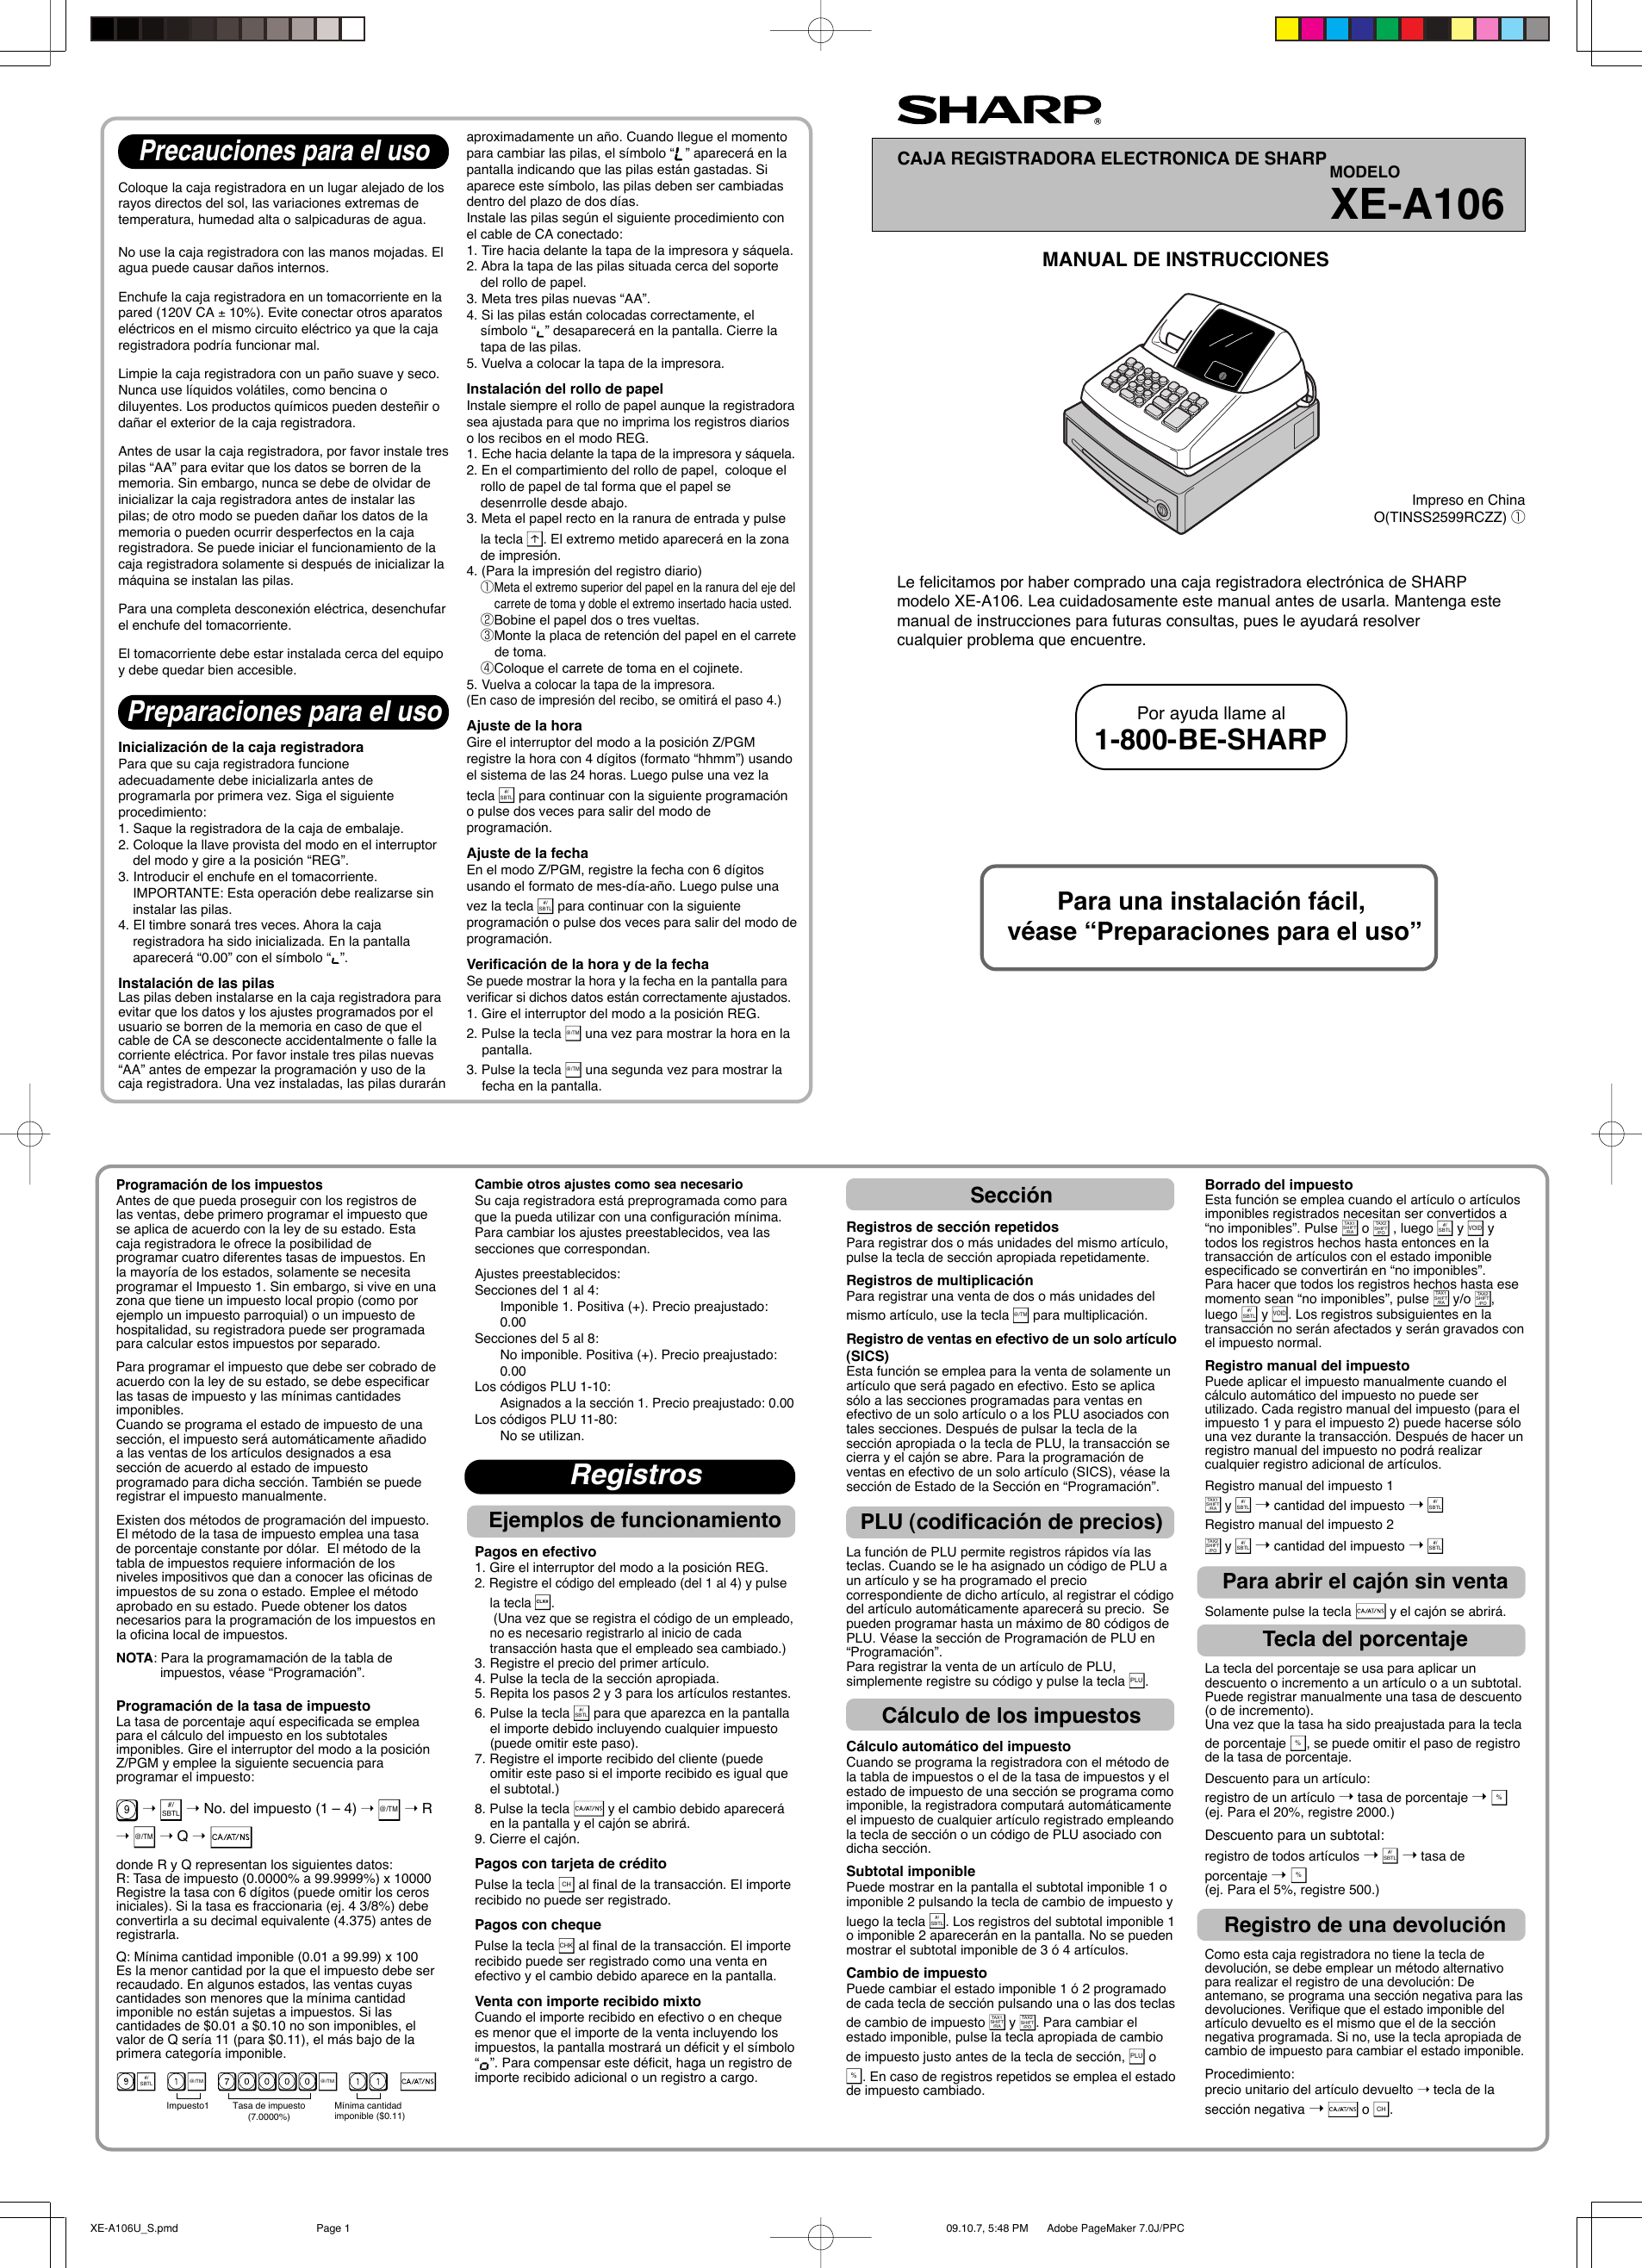 Page 1 of 2 - Sharp Sharp-Xe-A106-Owners-Manual- XE-A106U_S.pmd  Sharp-xe-a106-owners-manual